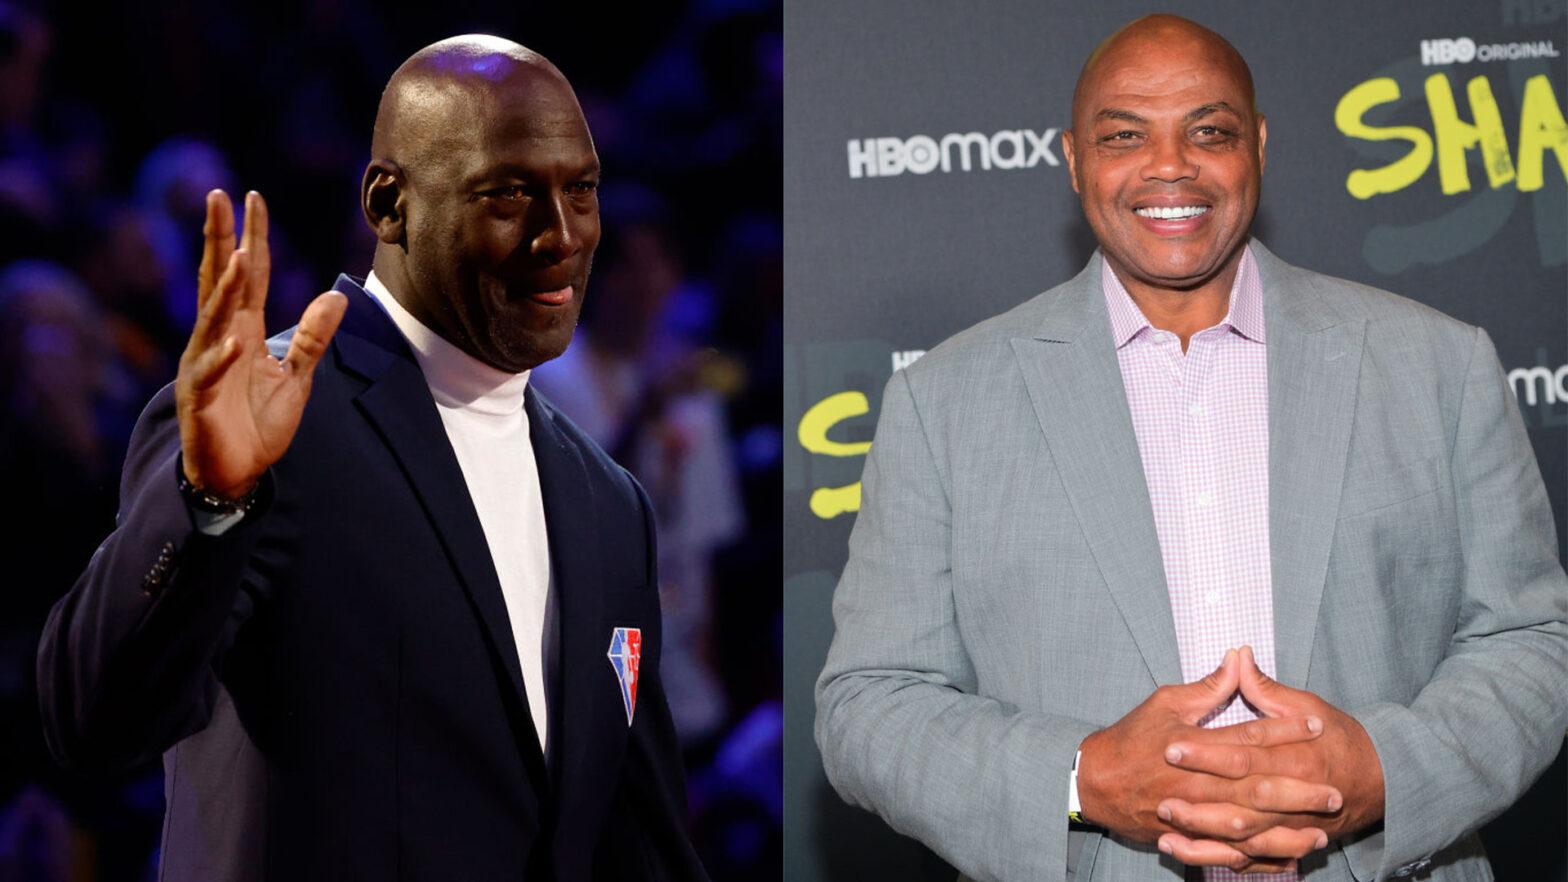 Charles Barkley Says Michael Jordan Gave Advice On His Nike Deal That Led To '10 Times More' In The Long Run